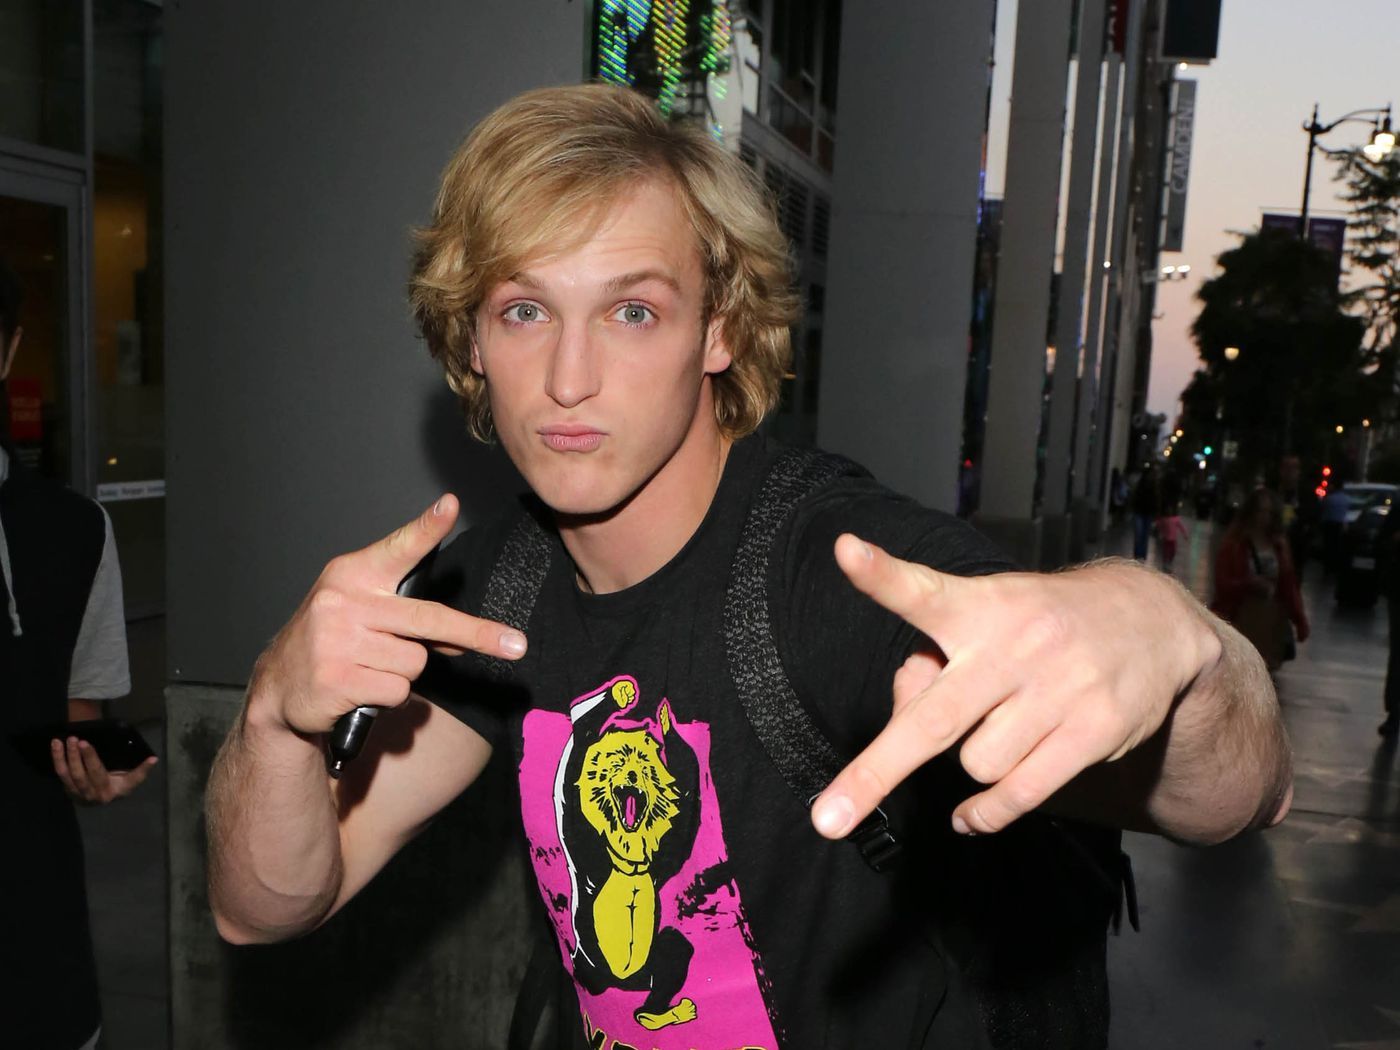 Logan Paul And Why Don't We Wallpapers Wallpaper Cave